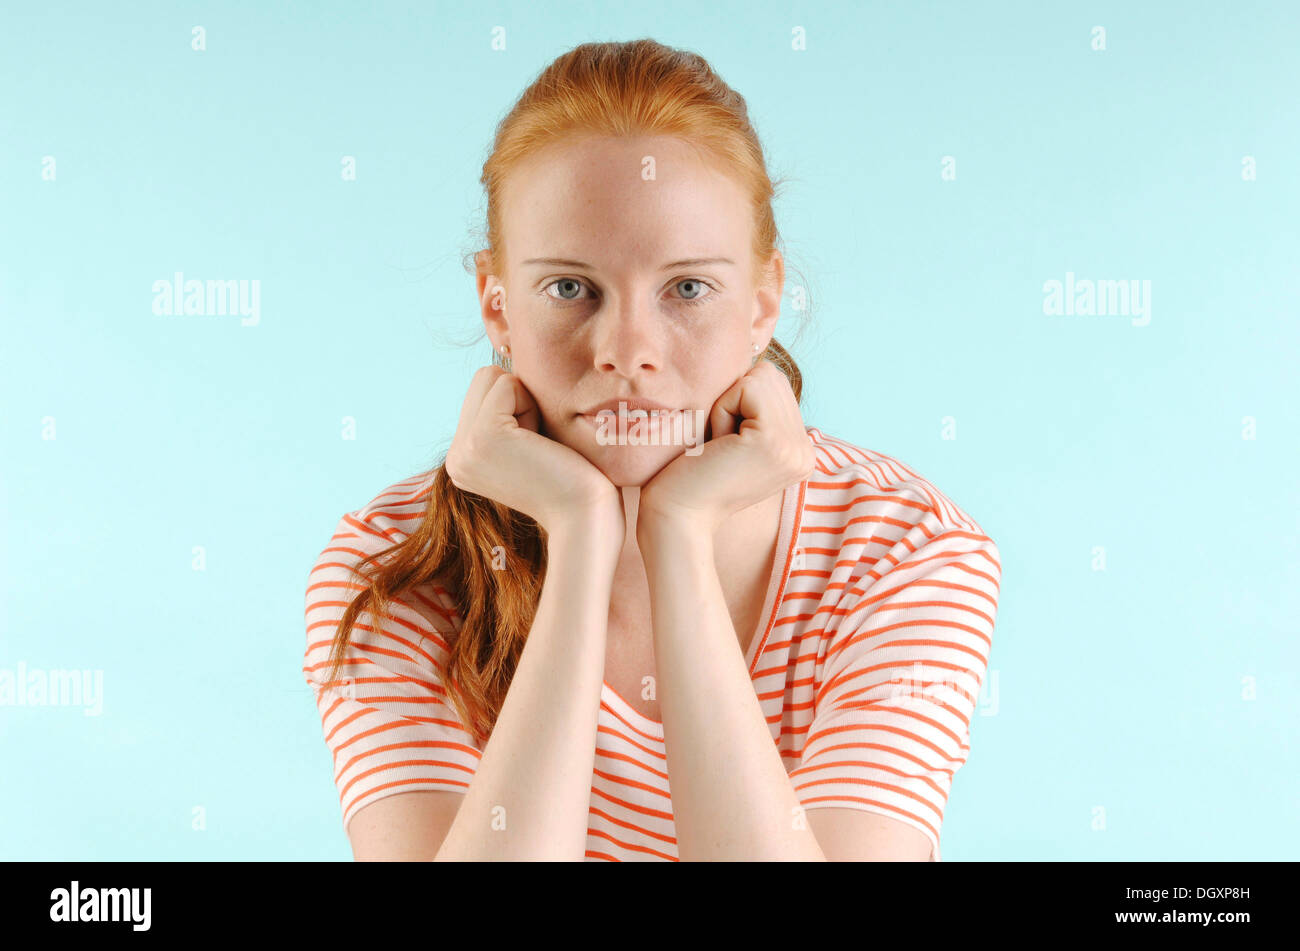 Young red-haired woman, portrait Stock Photo